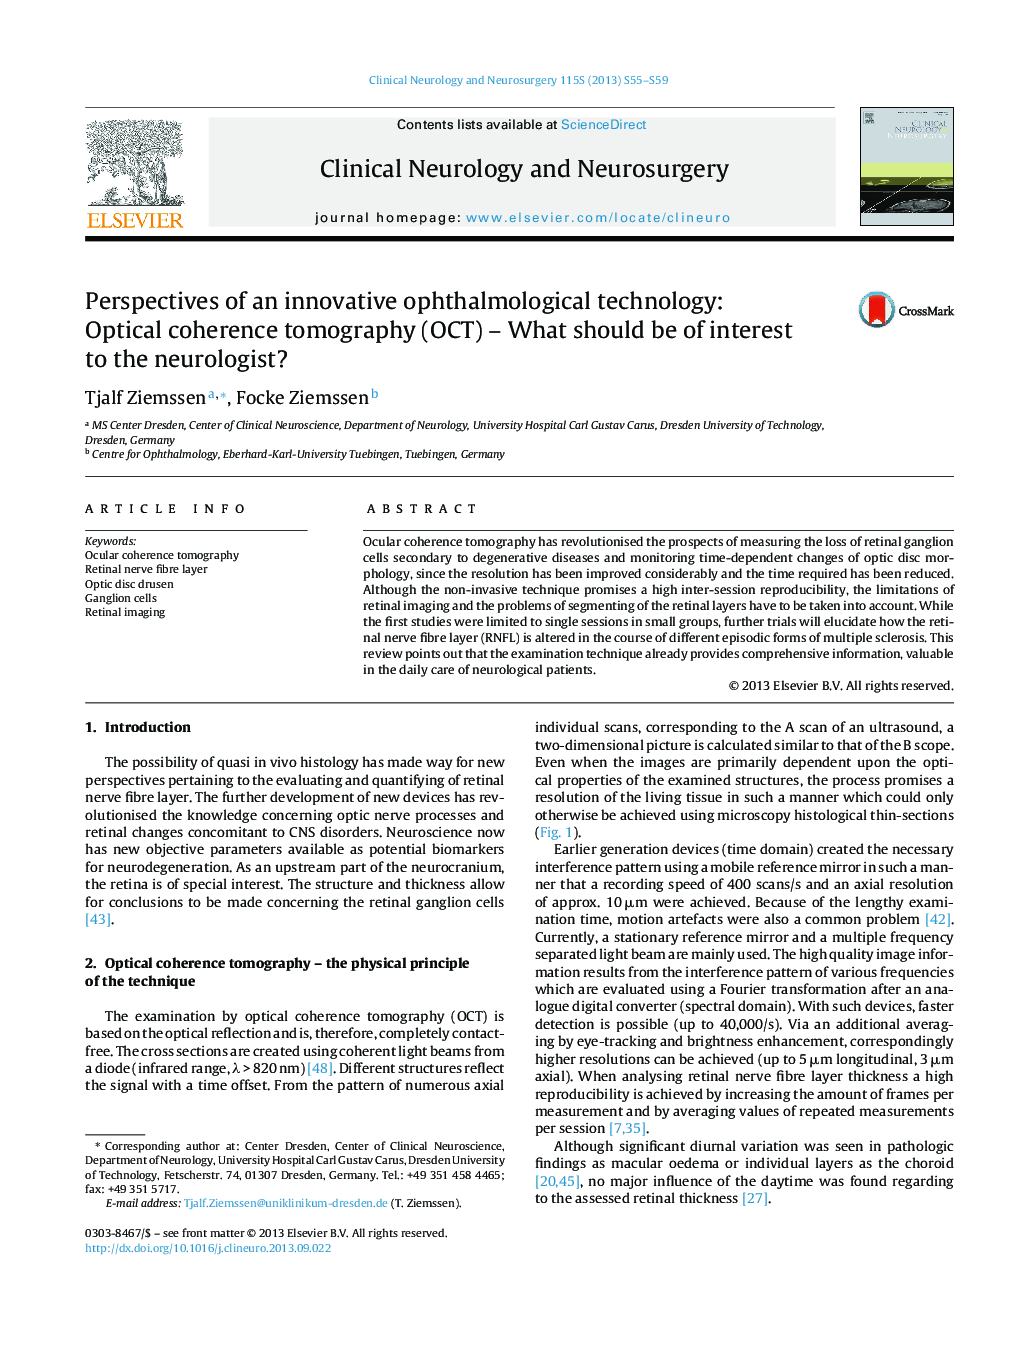 Perspectives of an innovative ophthalmological technology: Optical coherence tomography (OCT) – What should be of interest to the neurologist?